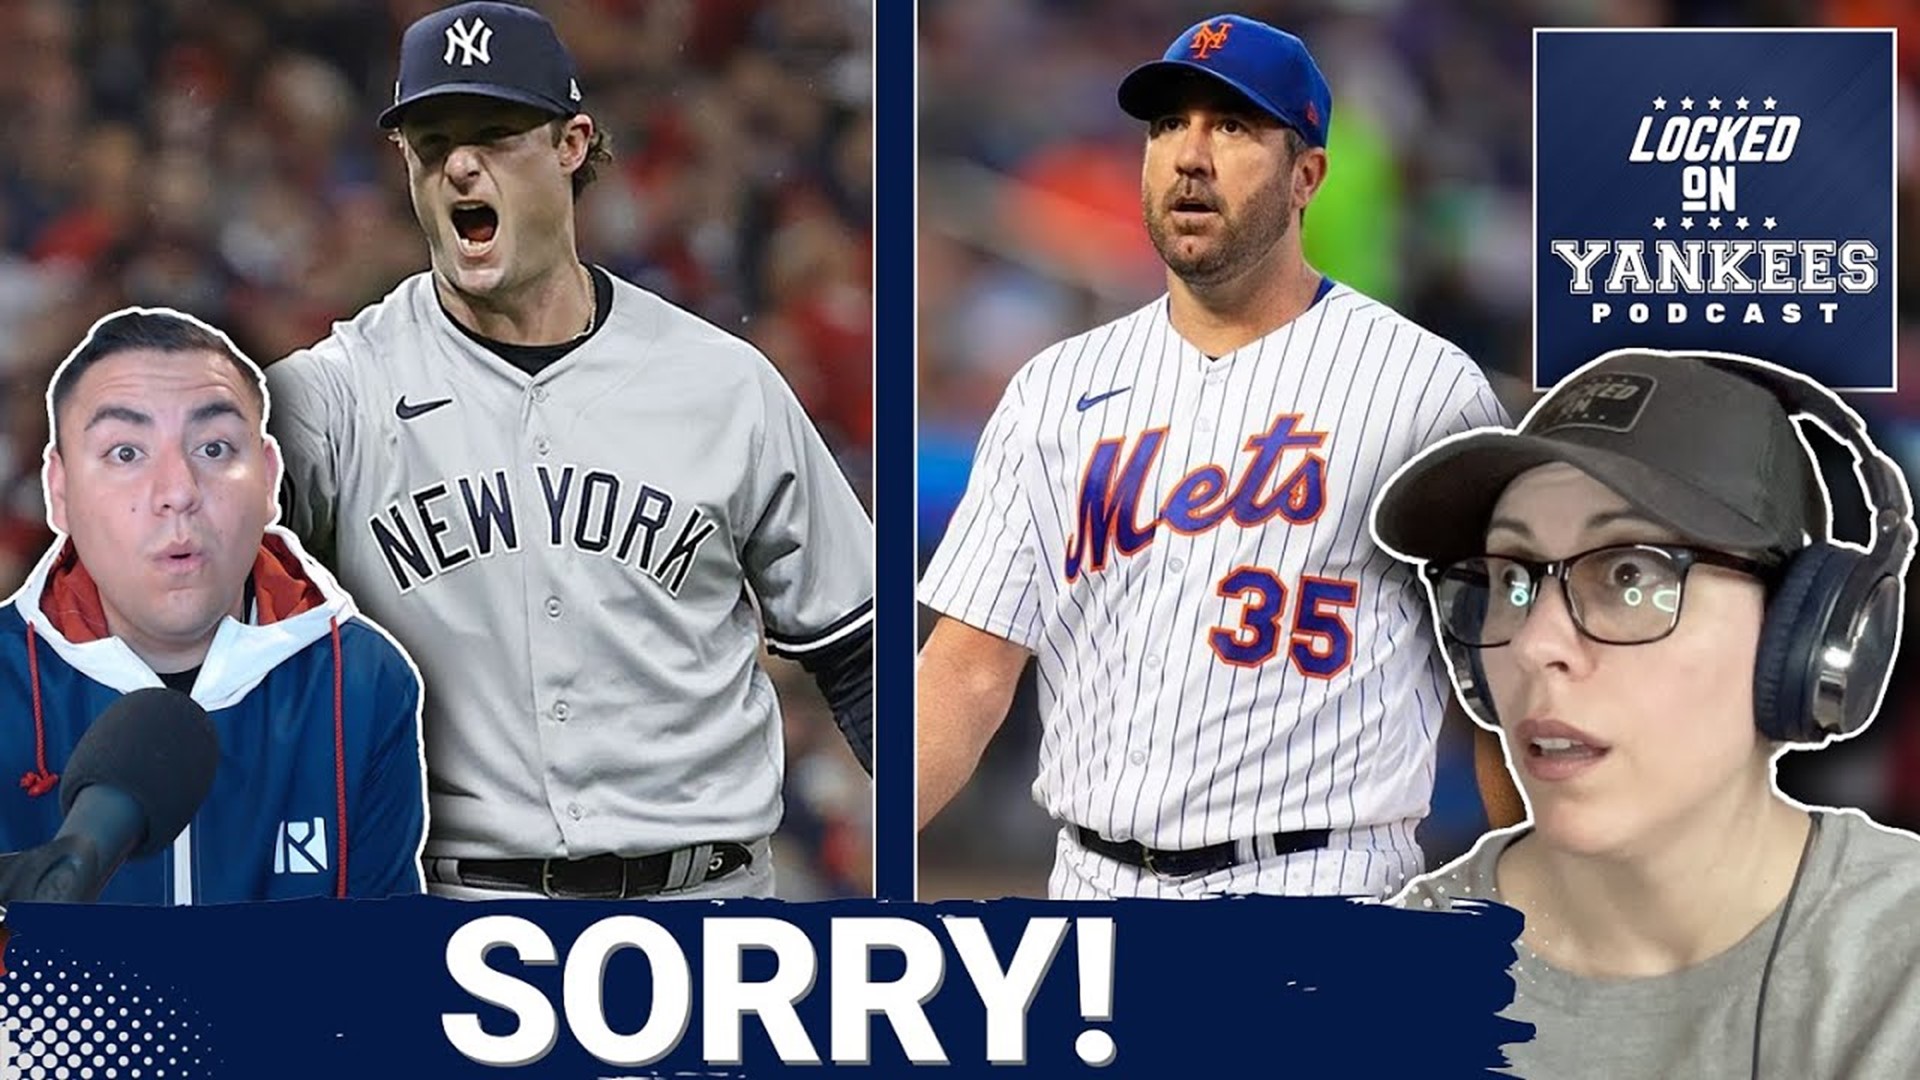 We were COMPLETELY WRONG about the Subway Series